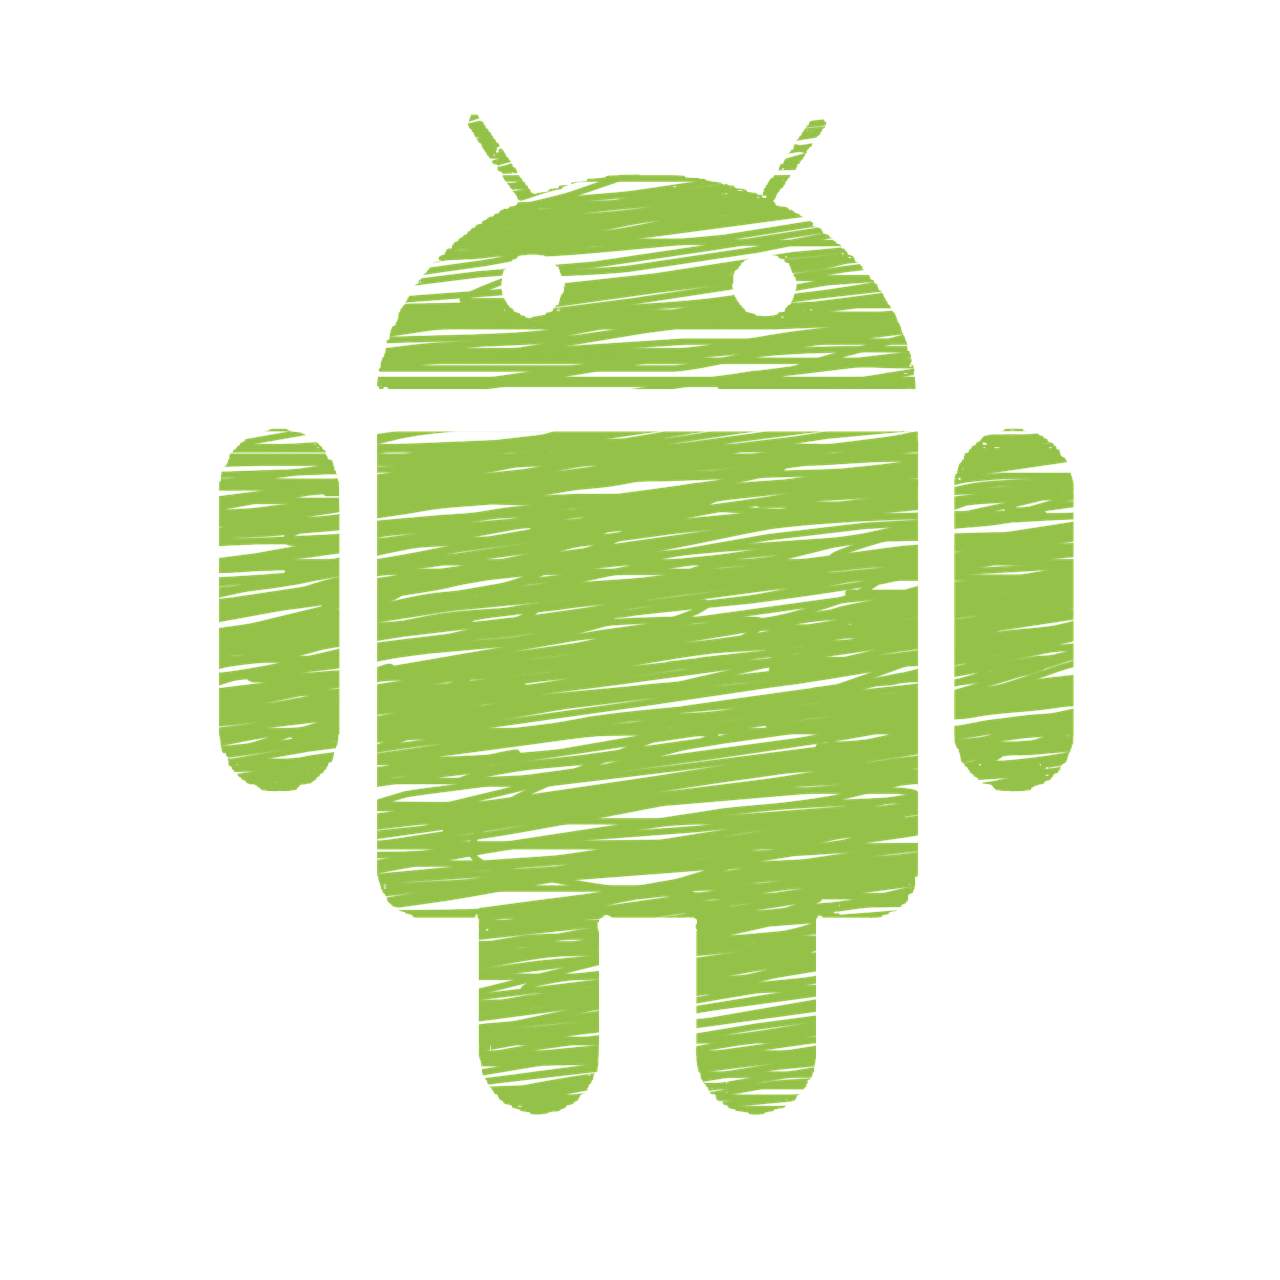 programme pour installer application android